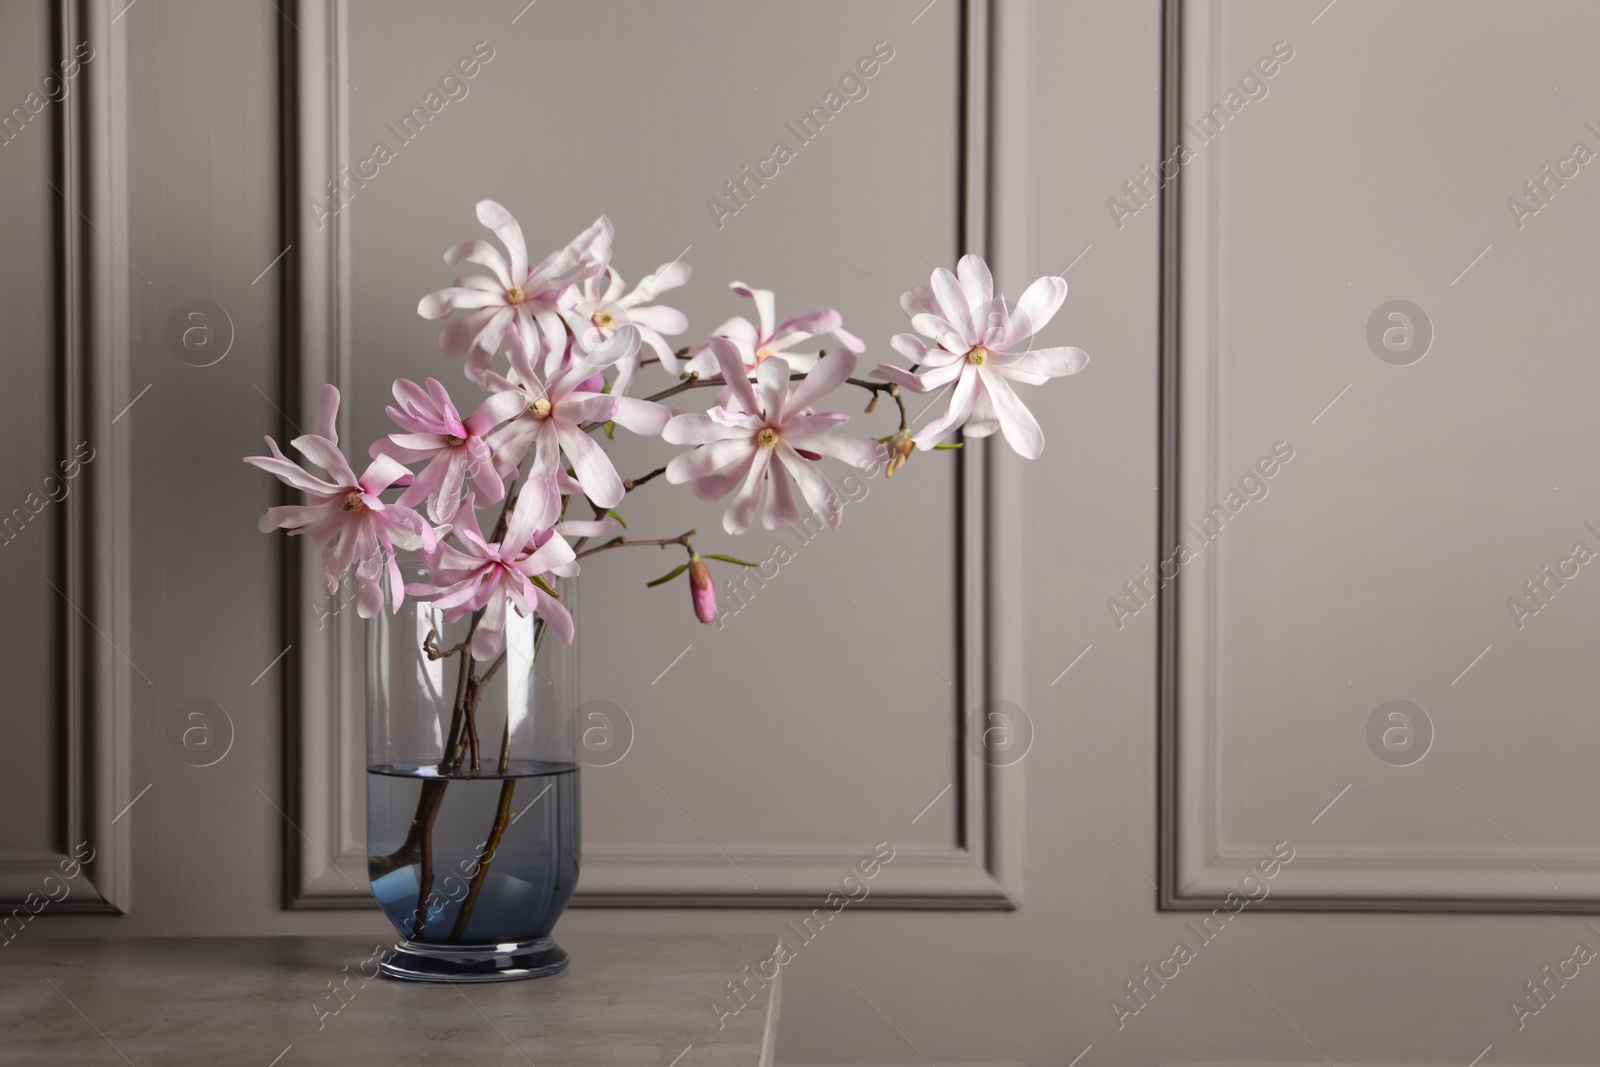 Photo of Magnolia tree branches with beautiful flowers in glass vase on table against grey background, space for text